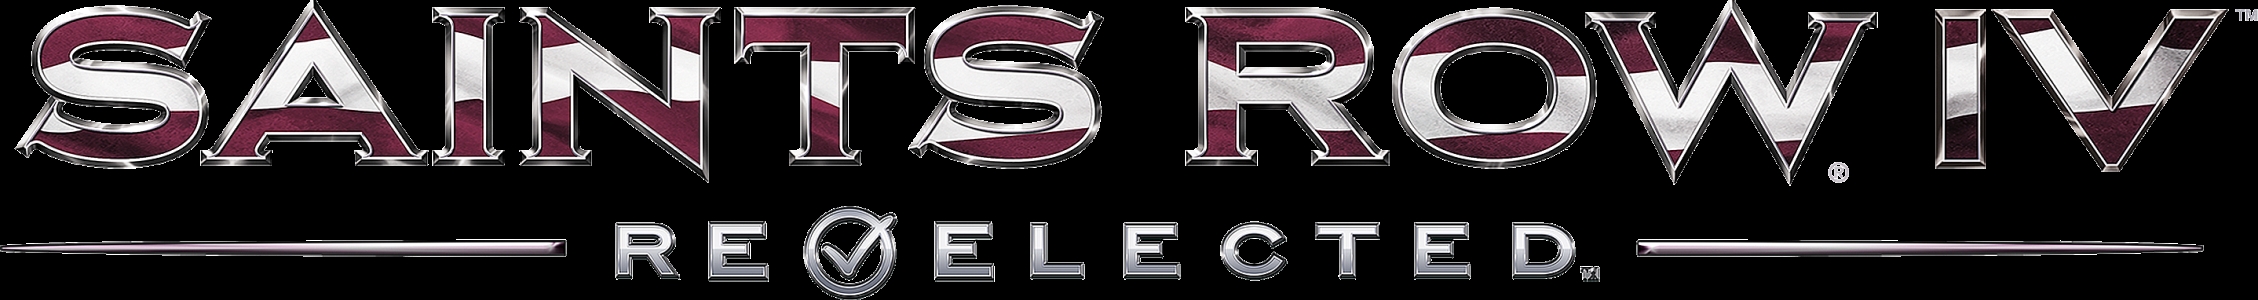 Saints Row IV: Re-Elected clearlogo